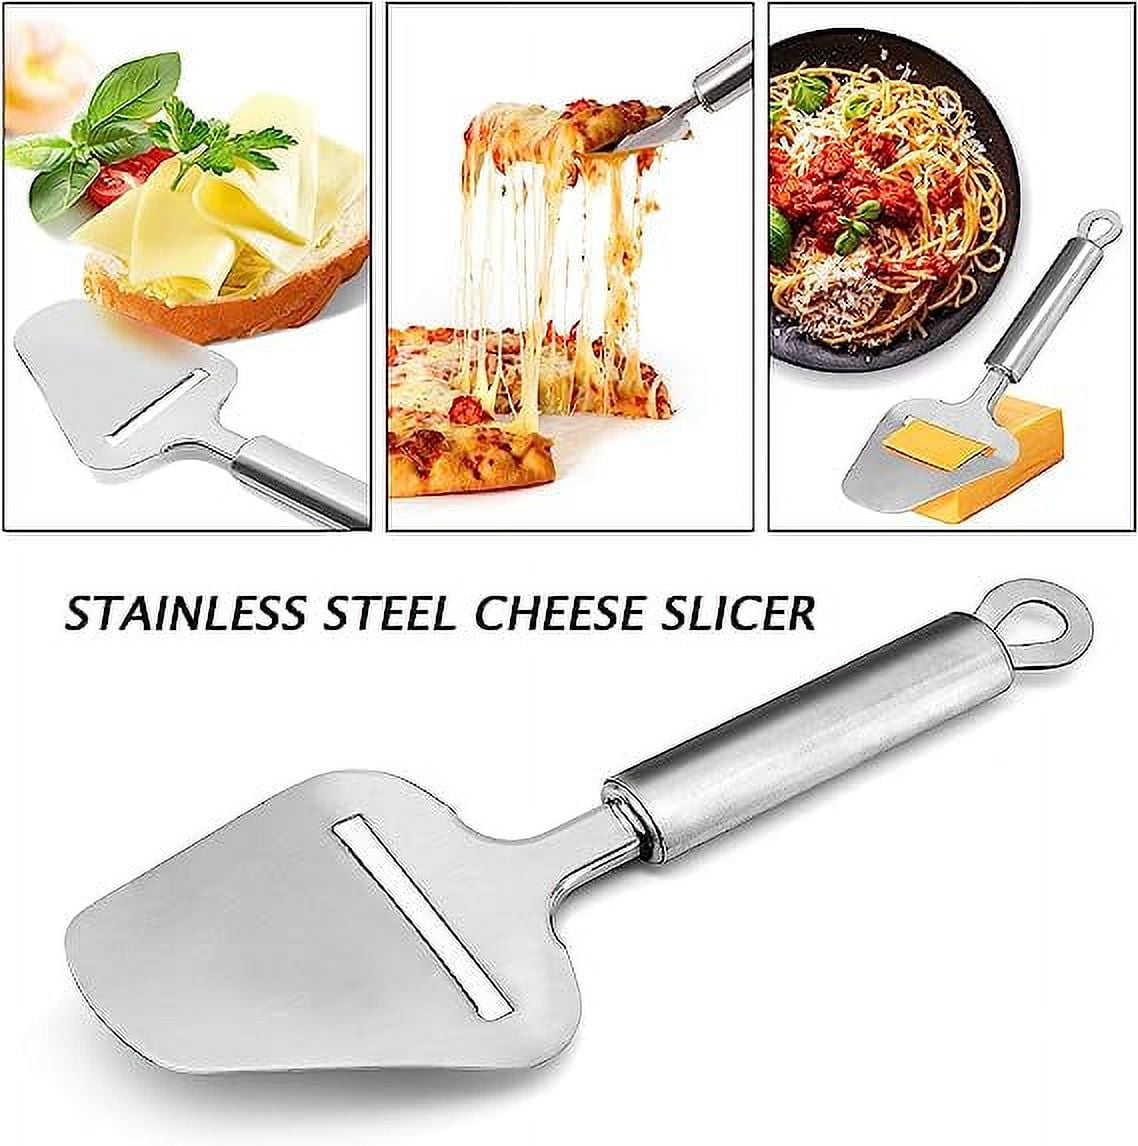 Protoiya Stainless Steel Cheese Slicer,Adjustable Cheese Shaver,for Cheddar, Gruyere, Raclette, Mozzarella Cheese Block,Thick and Thin Slicer, Cheese